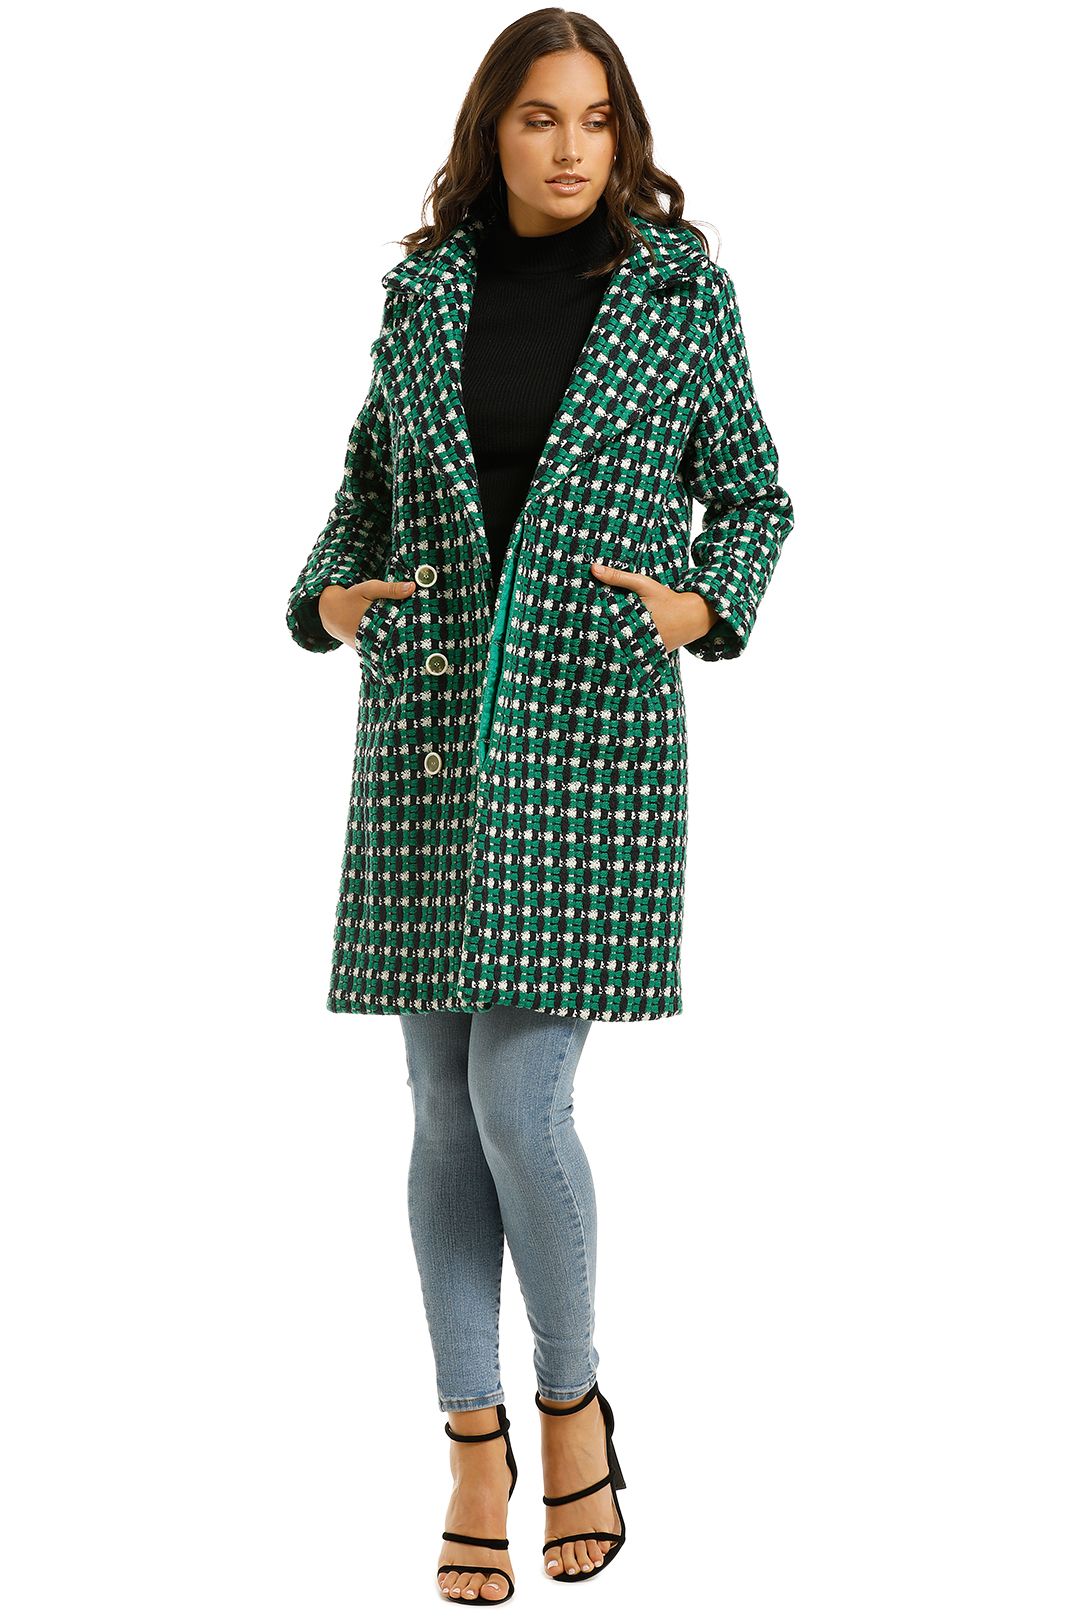 Coop-by-Trelise-Cooper-Rock-The-Coat-Green-Plaid-Front